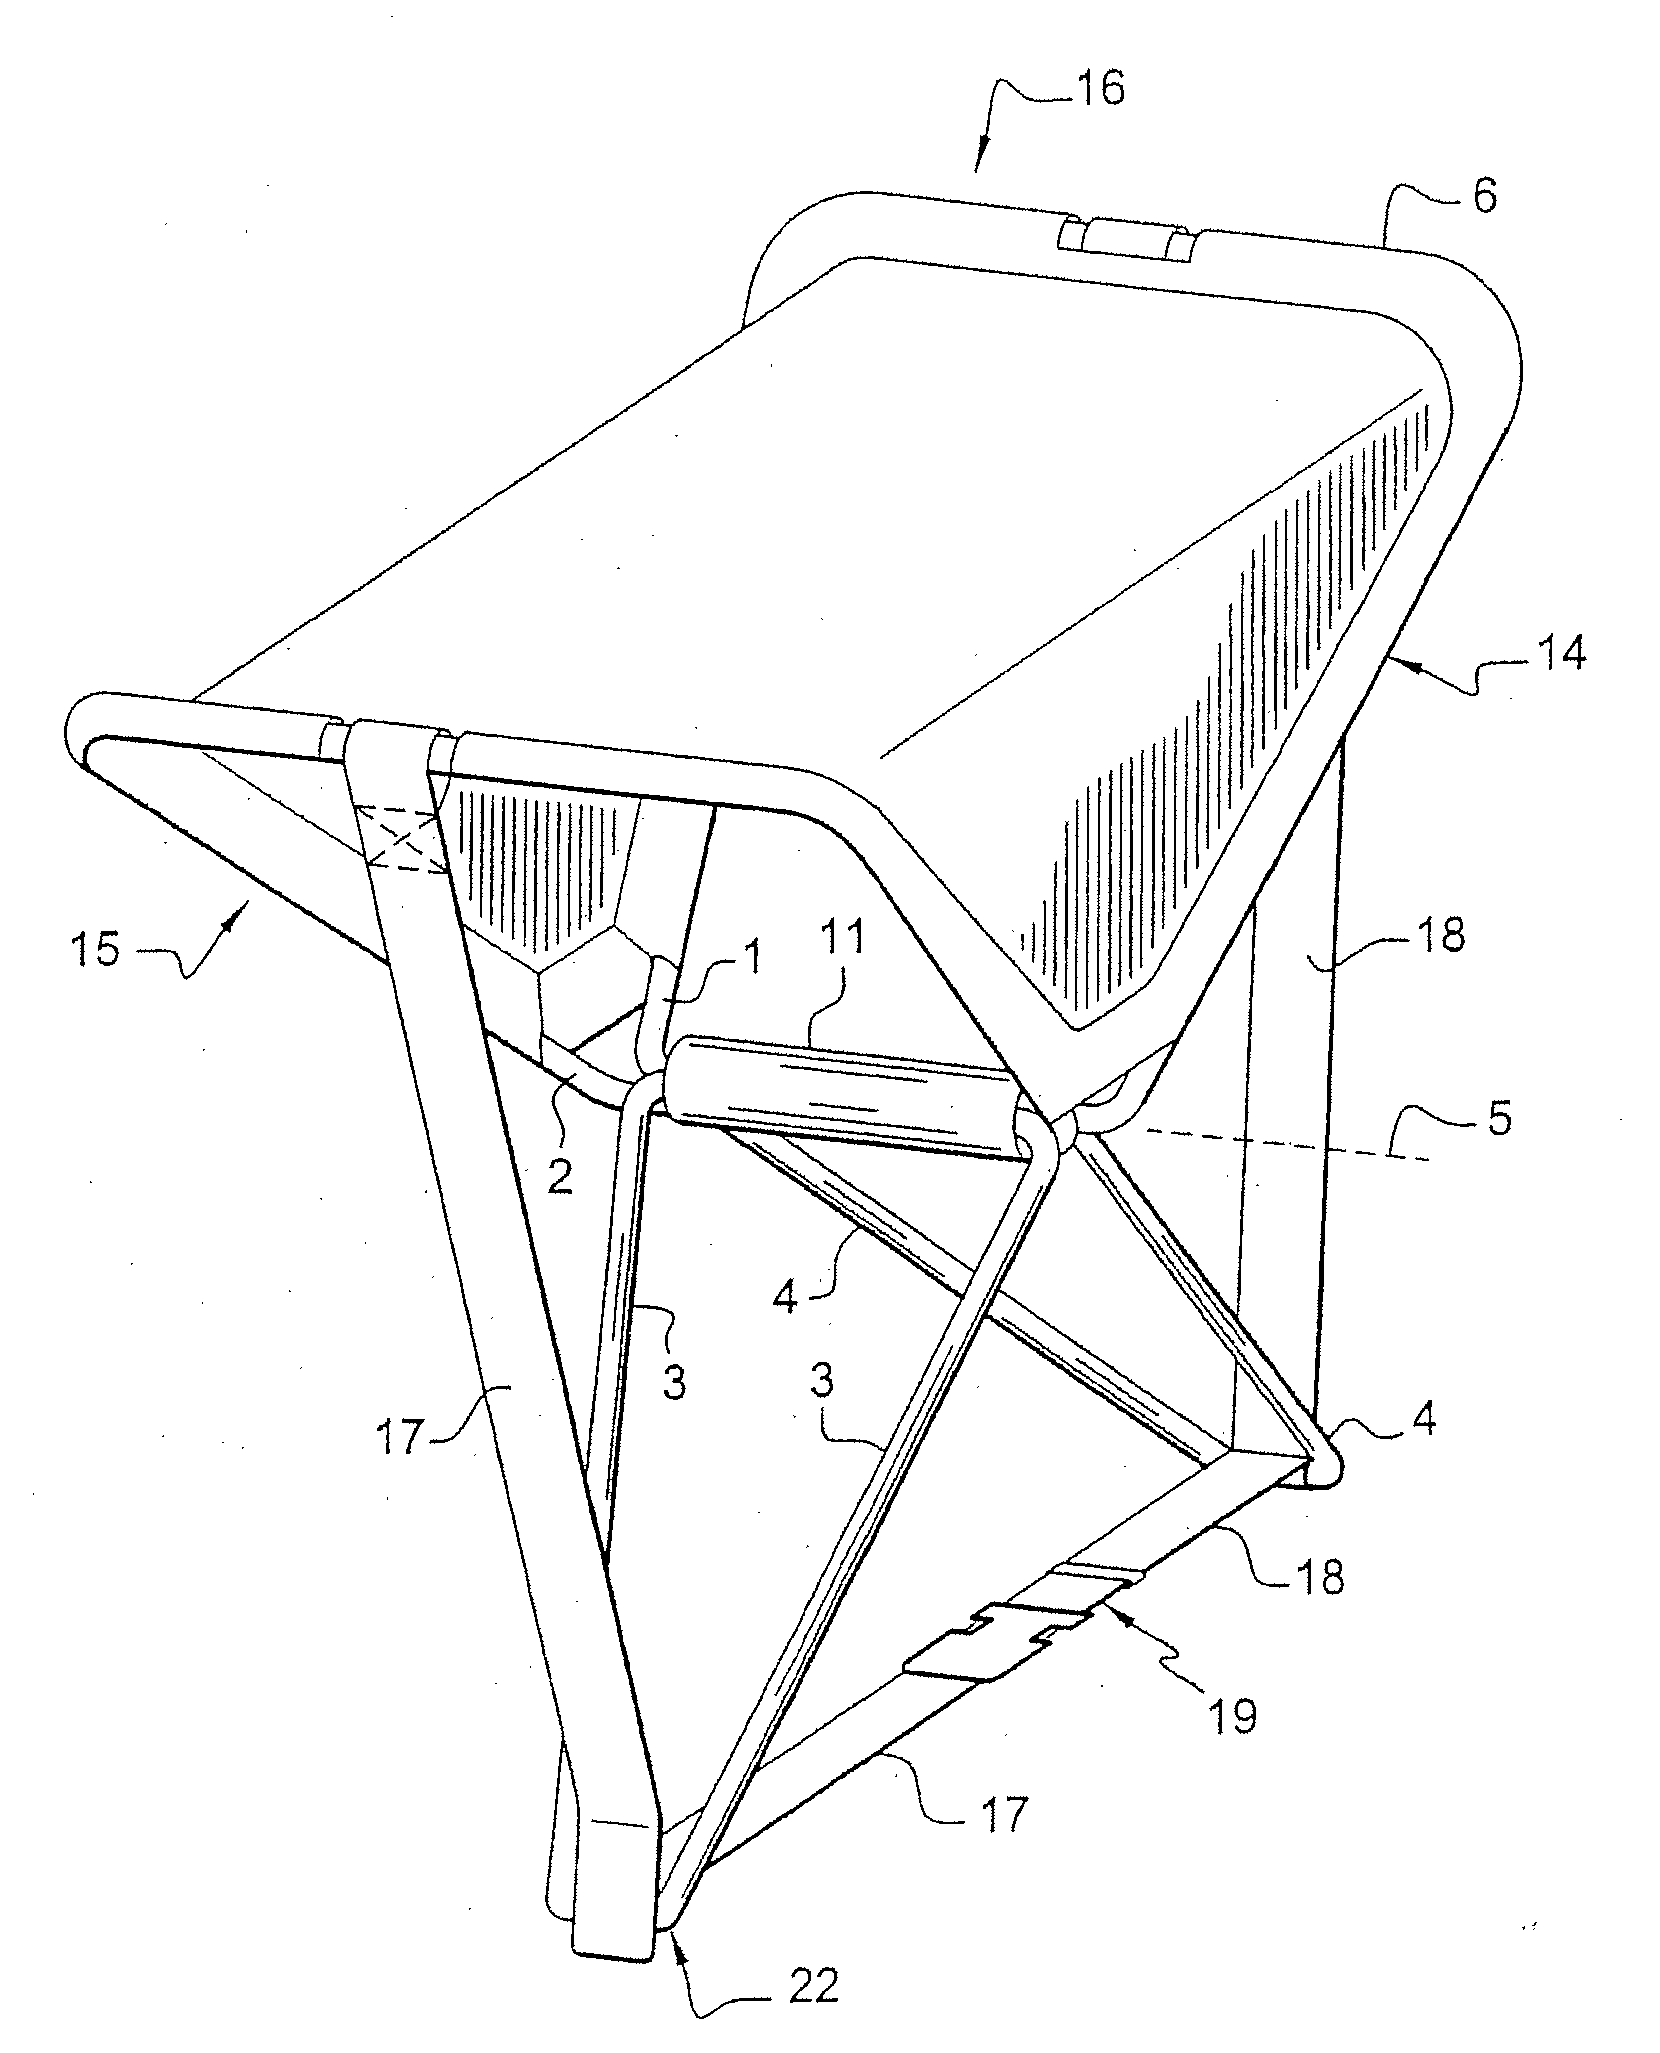 Foldable rest support